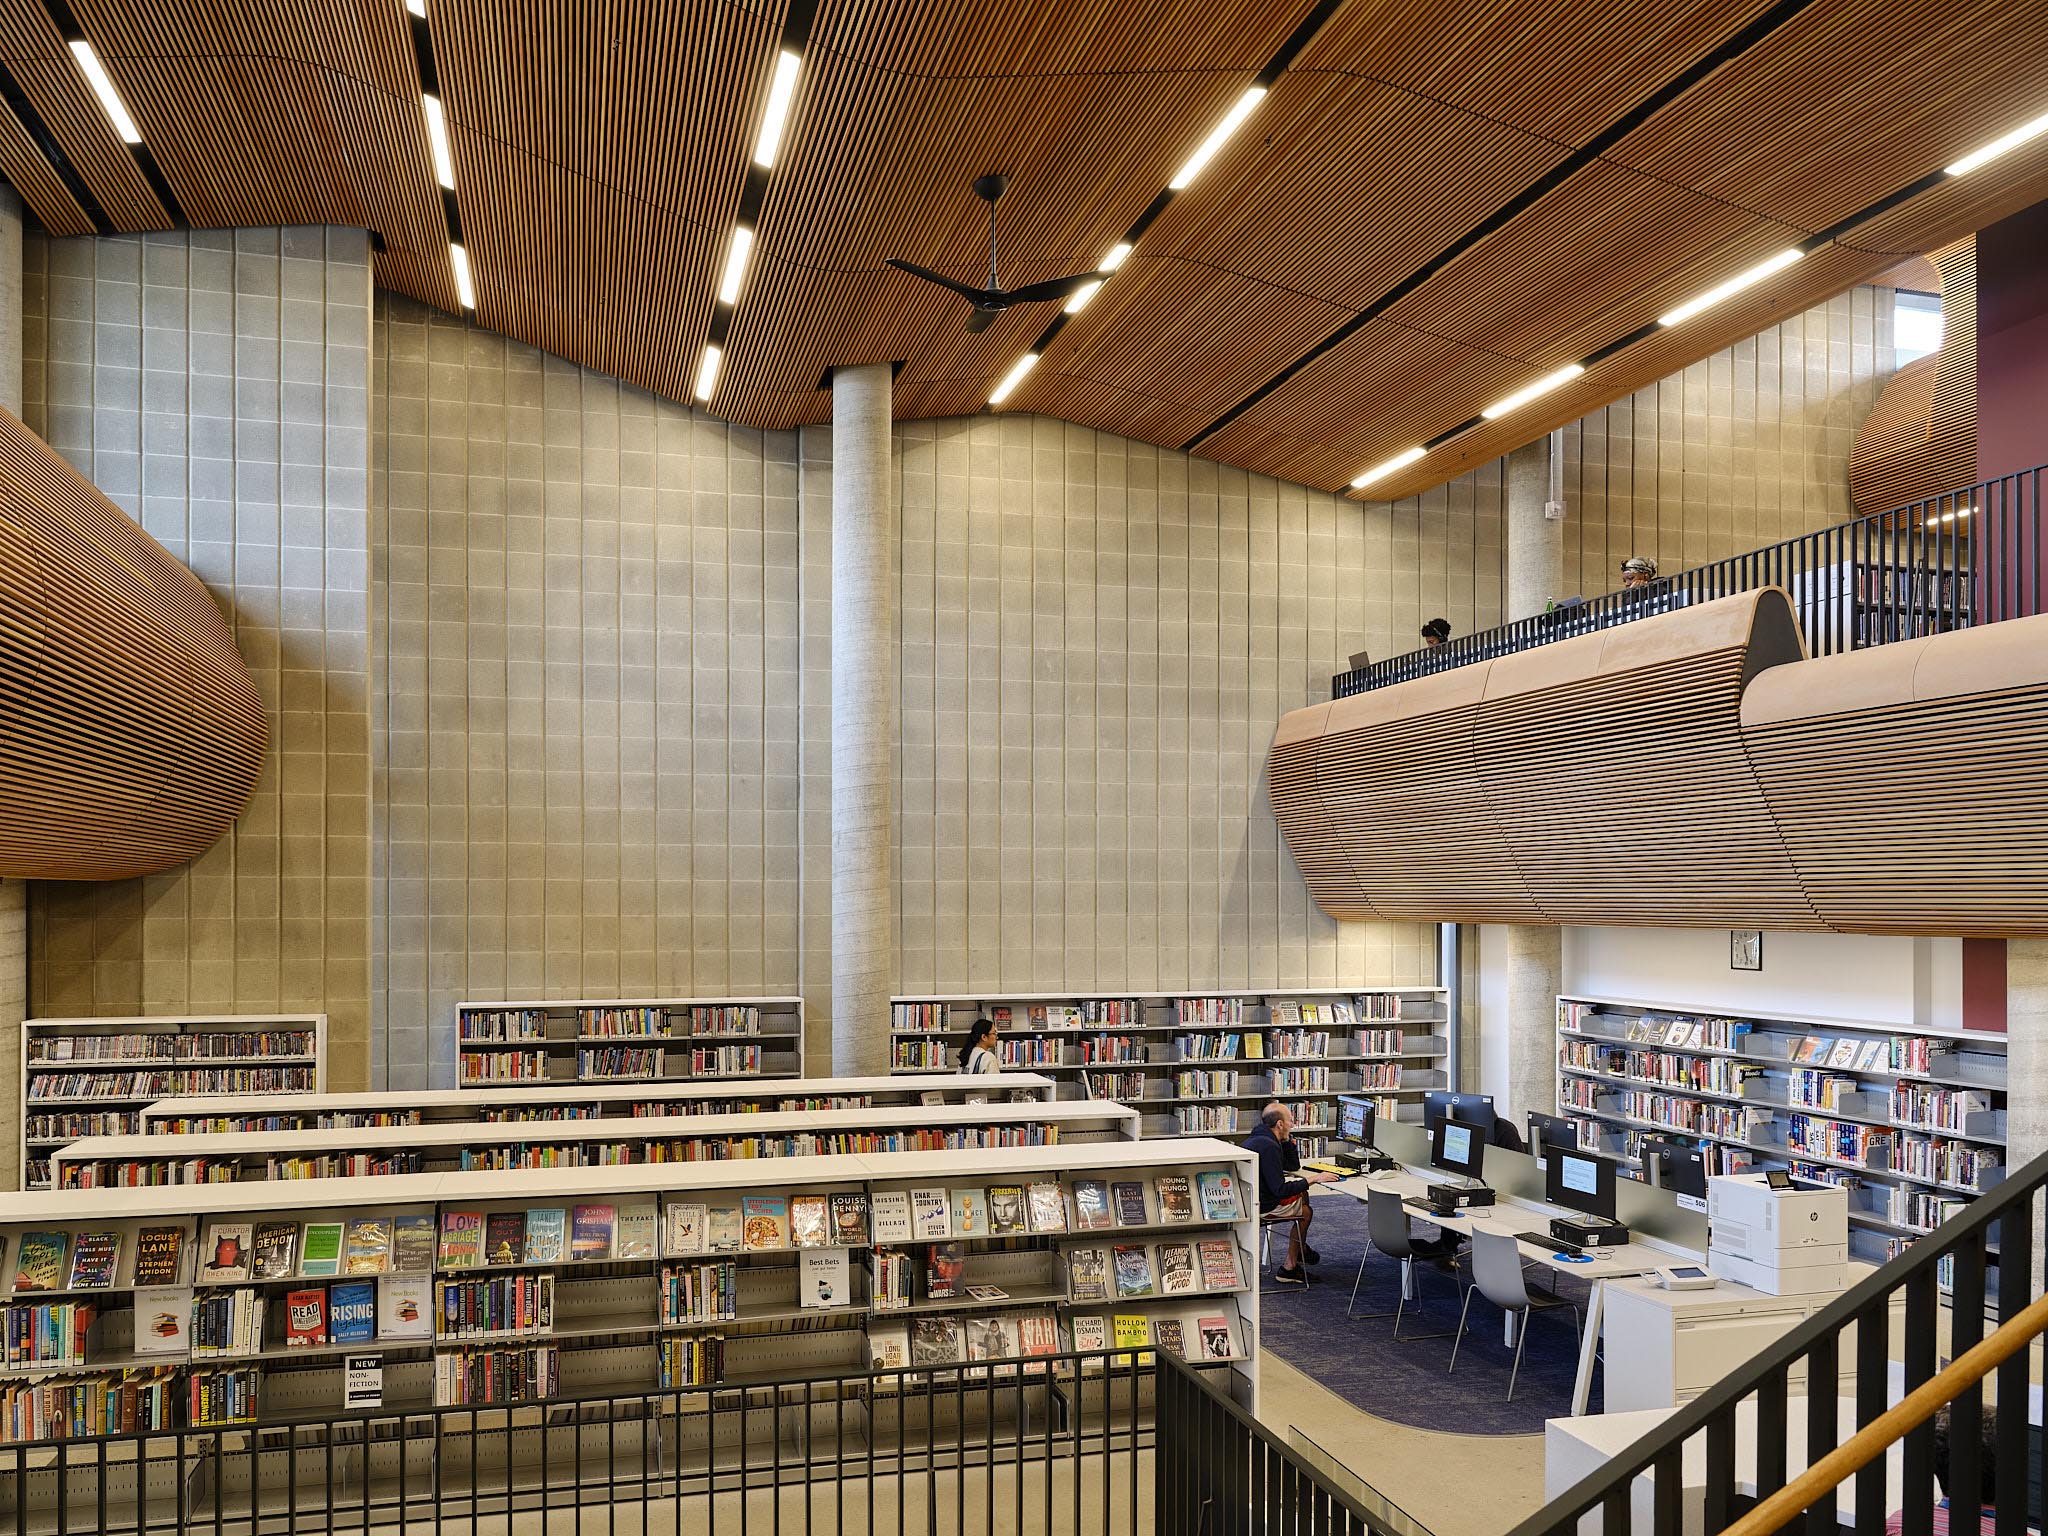 Interior image of a library with a curved roof and sides. Warm-wooden tones are present throughout.